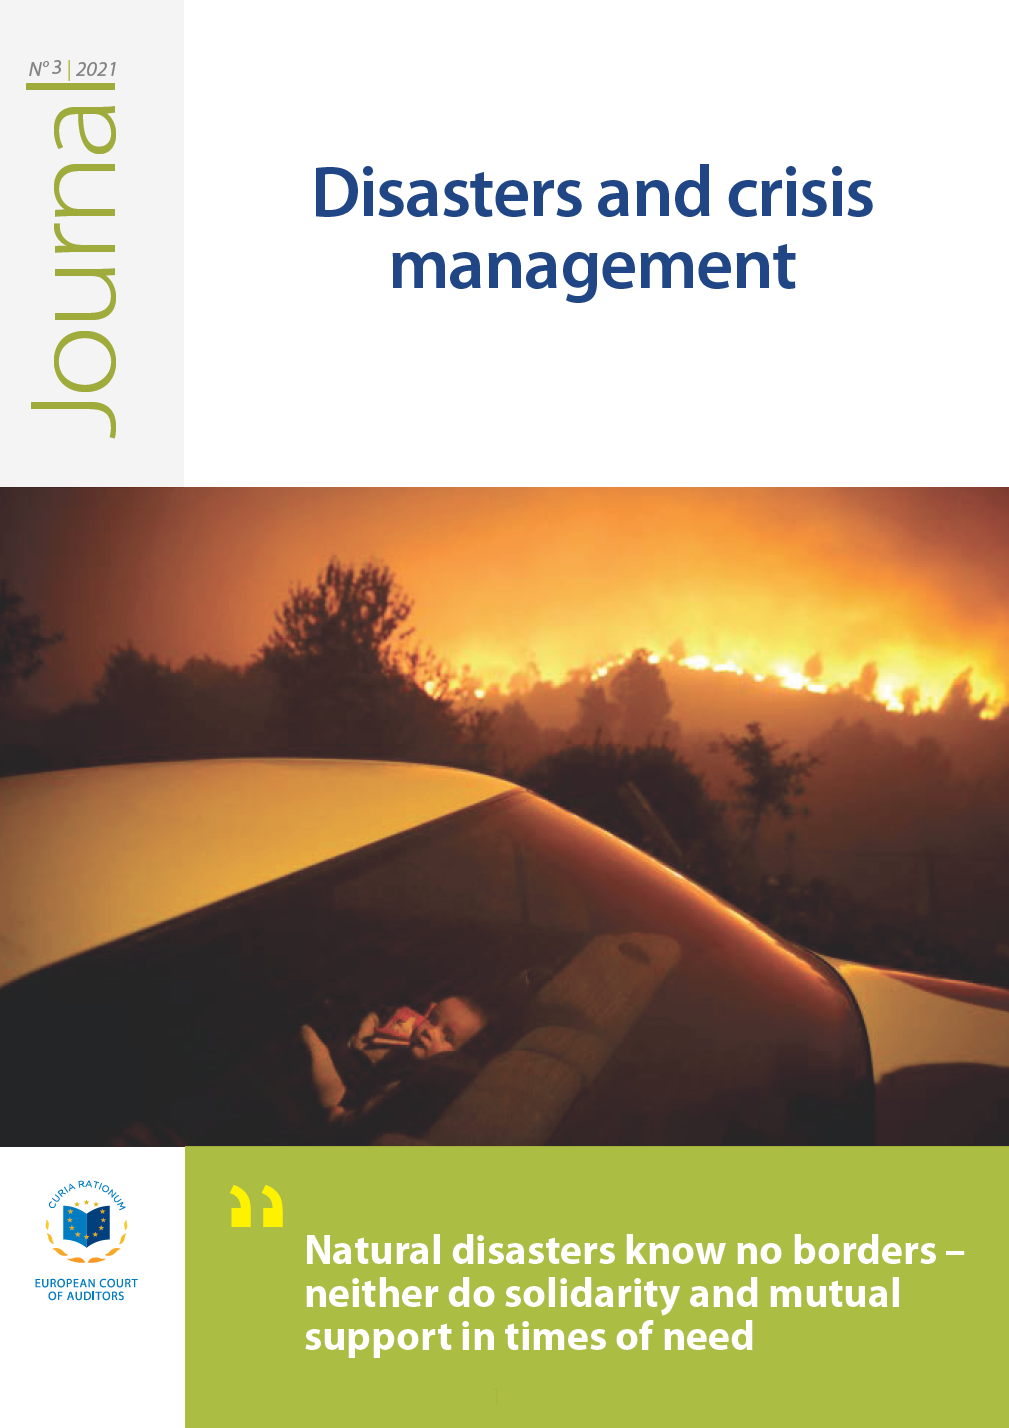 ECA Journal N° 3/2021 – Disasters and crisis management